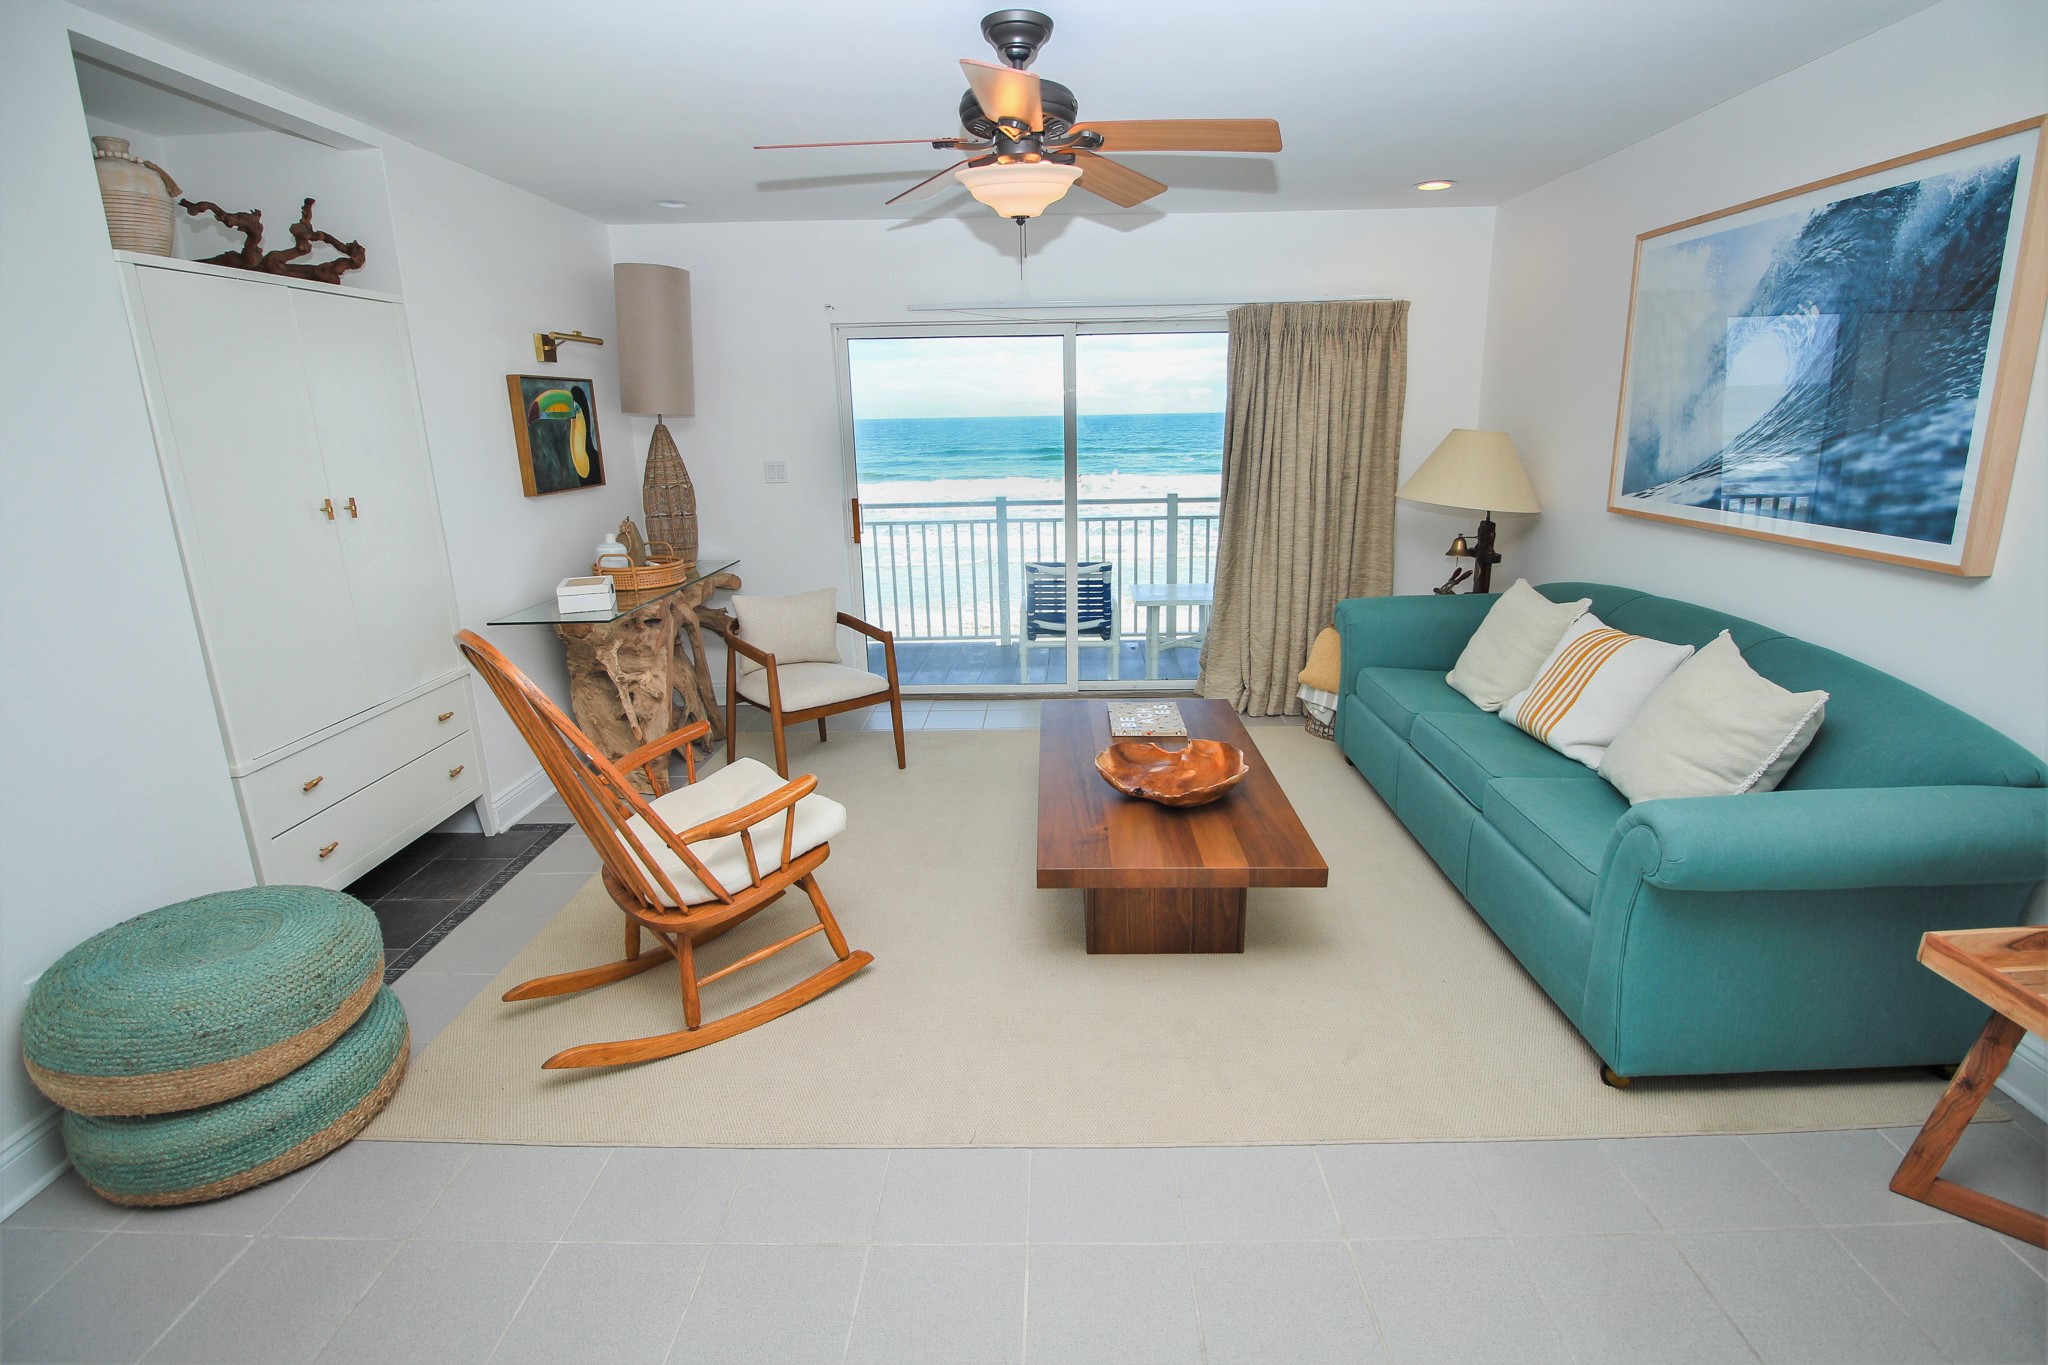 Oceanfront views from living room